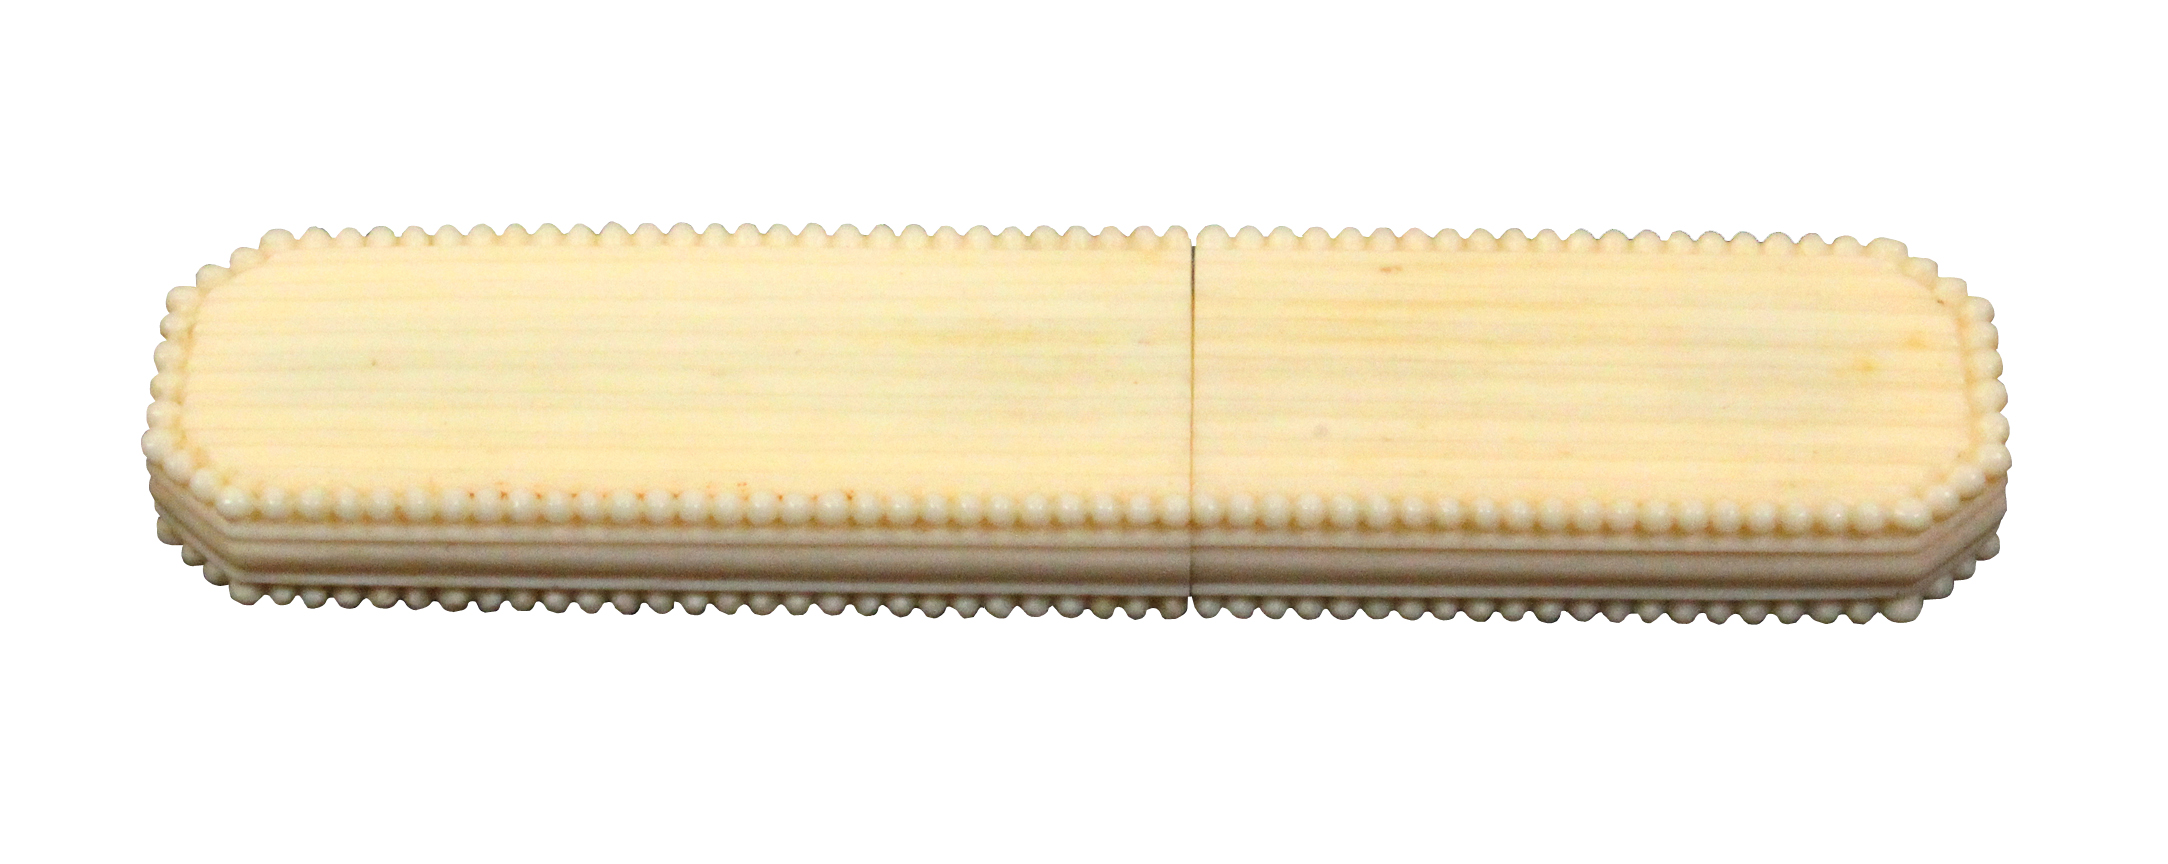 A fine early 19th Century ivory needle case of cut corner rectangular form, reeded decoration within